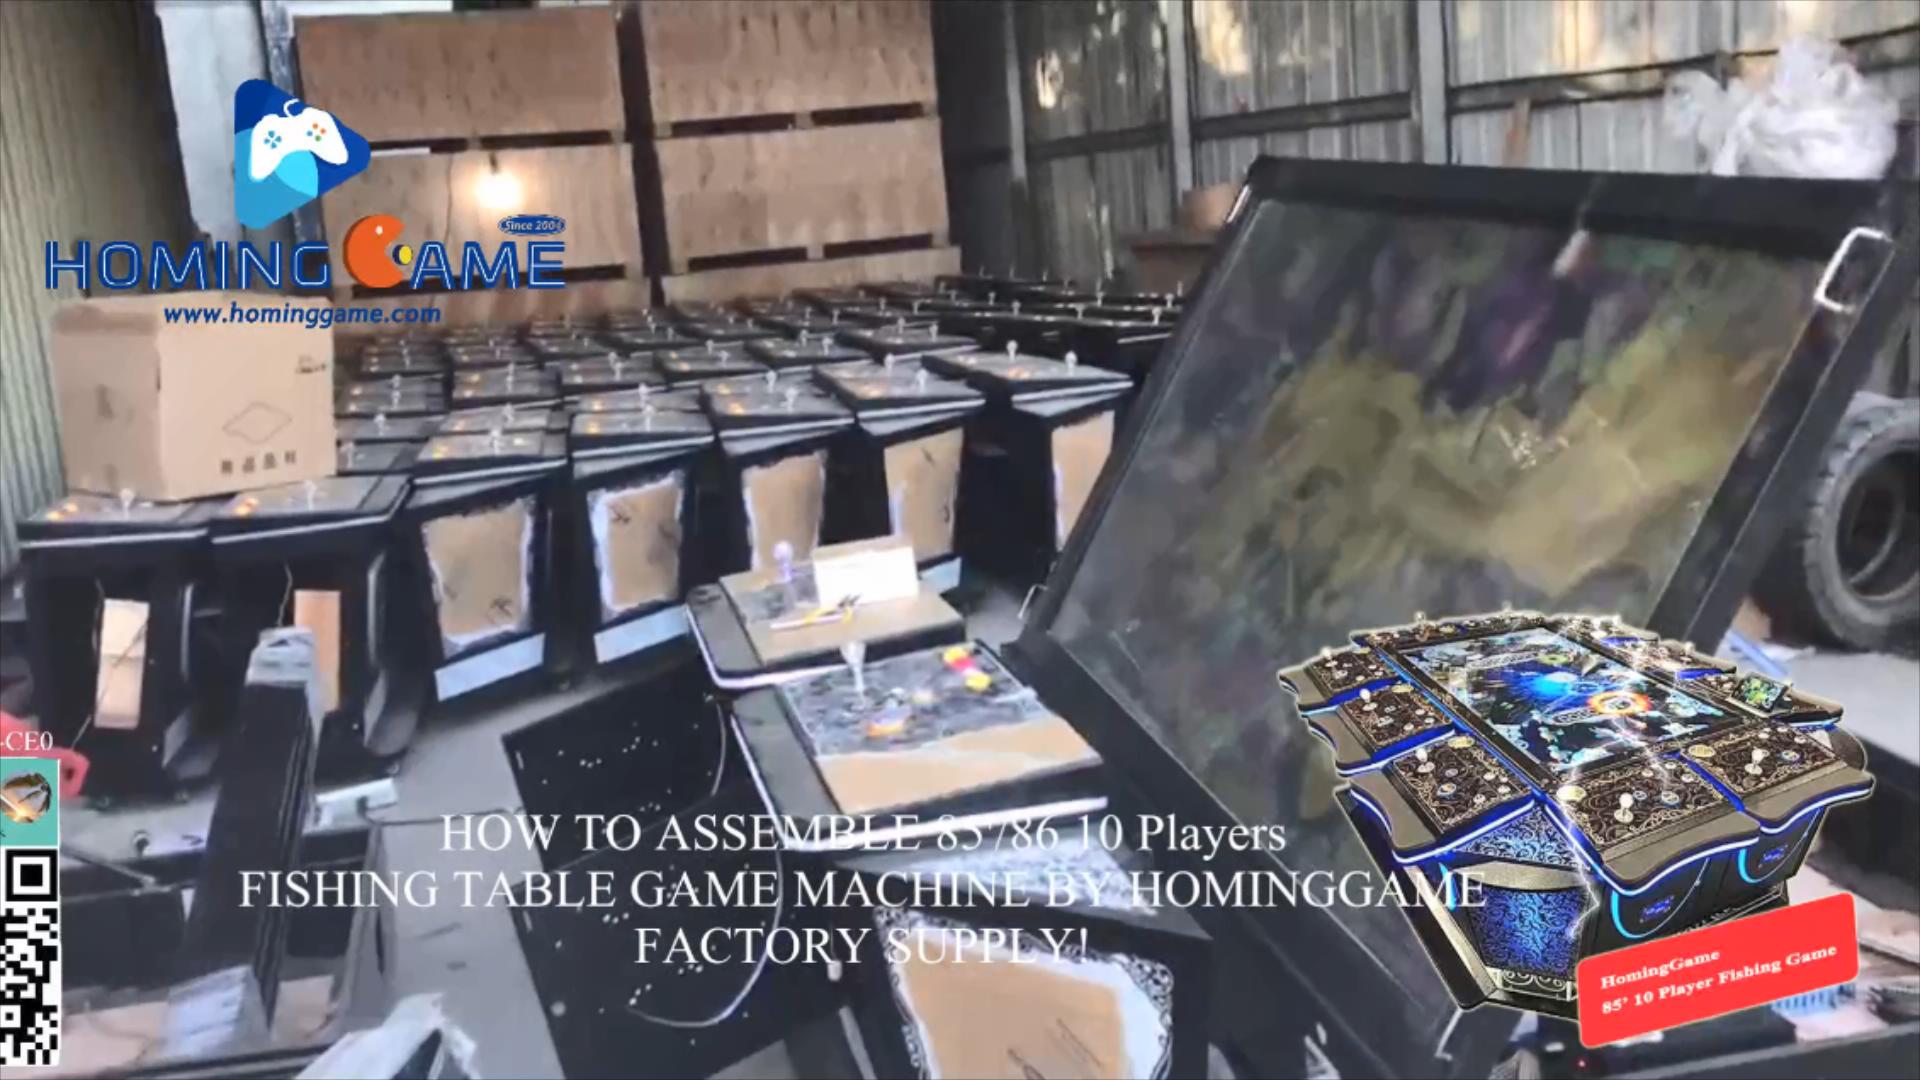 How To Assemble 85 86 Large Screen 10 Players Fishing Table Game Machine Hot Fishing Game In USA By HomingGame Factory Supply !!(Order Call Whatsapp:+8618688409495- Sales@hominggame.com),85‘ 10 players fishing table game machine,85' large screen 10 player fishing game machine,85' screen 10 player fishing game machine,85' screen fishing game machine,85' fishing table game machine,10 player fishing game machine,10 player fishing table game machine,fishing game,fishing table game machine,fishing game machine,ocean king fishing game machine,ocean king 3 fishing game machine,ocean king 3 monster awaken fishing game machine,ocean king 3 fire phoenix fishing game machine,dragon king fishing game machine,dragon hunter fishing game machine,ocean king 2 golden legend fishing game machine,ocean monster fishing game machine,kongfu panda fishing game machine,rampage fishing game machine,tiger strike fishing game machine,fire kylin fishing game machine,gaming machine,gambling machine,fish hunter fishing game machine,ocean monster fishing game,hominggame,www.gametube.hk,entertainment game machine,game machine,arcade game machine,arcade game machine for sale,indoor game machine,amsuement machine,hominggames,casino gaming machine,casino machine,slot machine,slot game machine,8 palyer fishing table game machine,fishing game machine decoder box,fishing game decoder box,how to play the fishing game machine